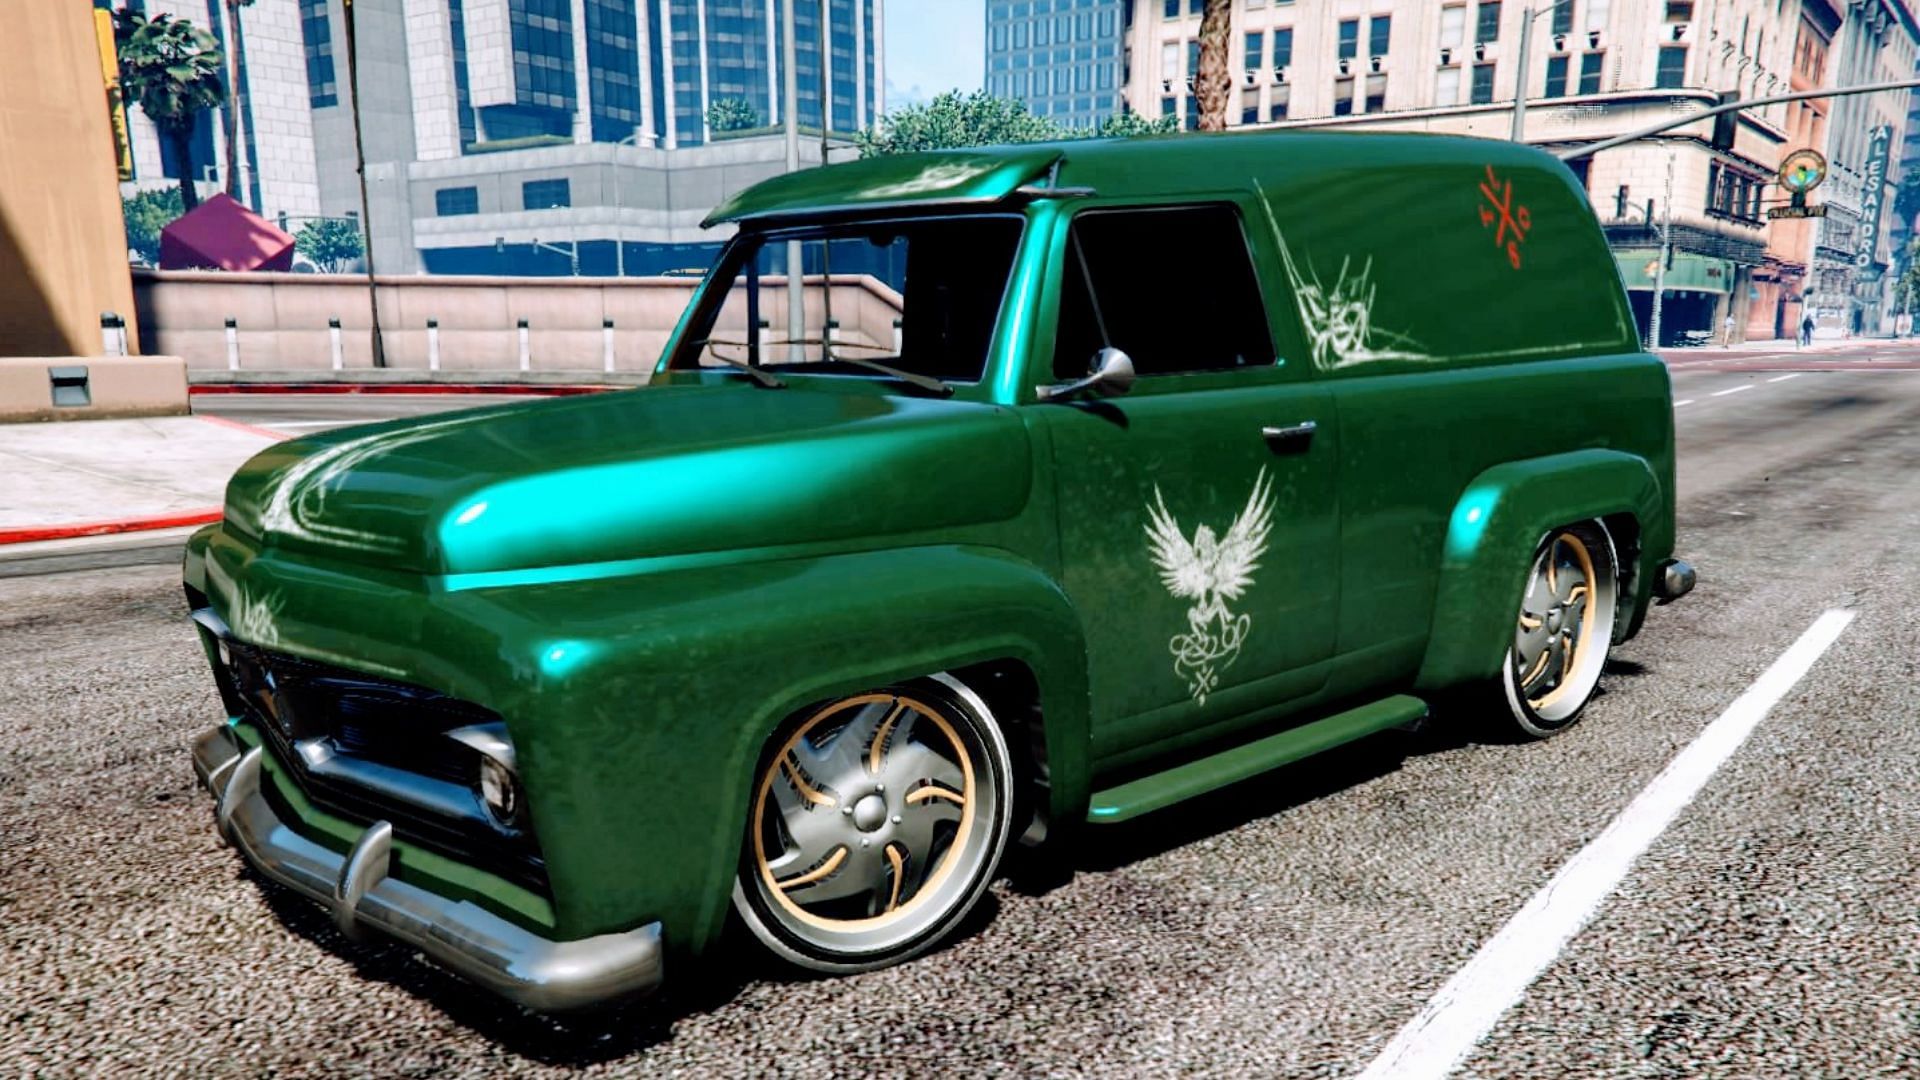 The Lost Slamvan is notoriously difficult to obtain